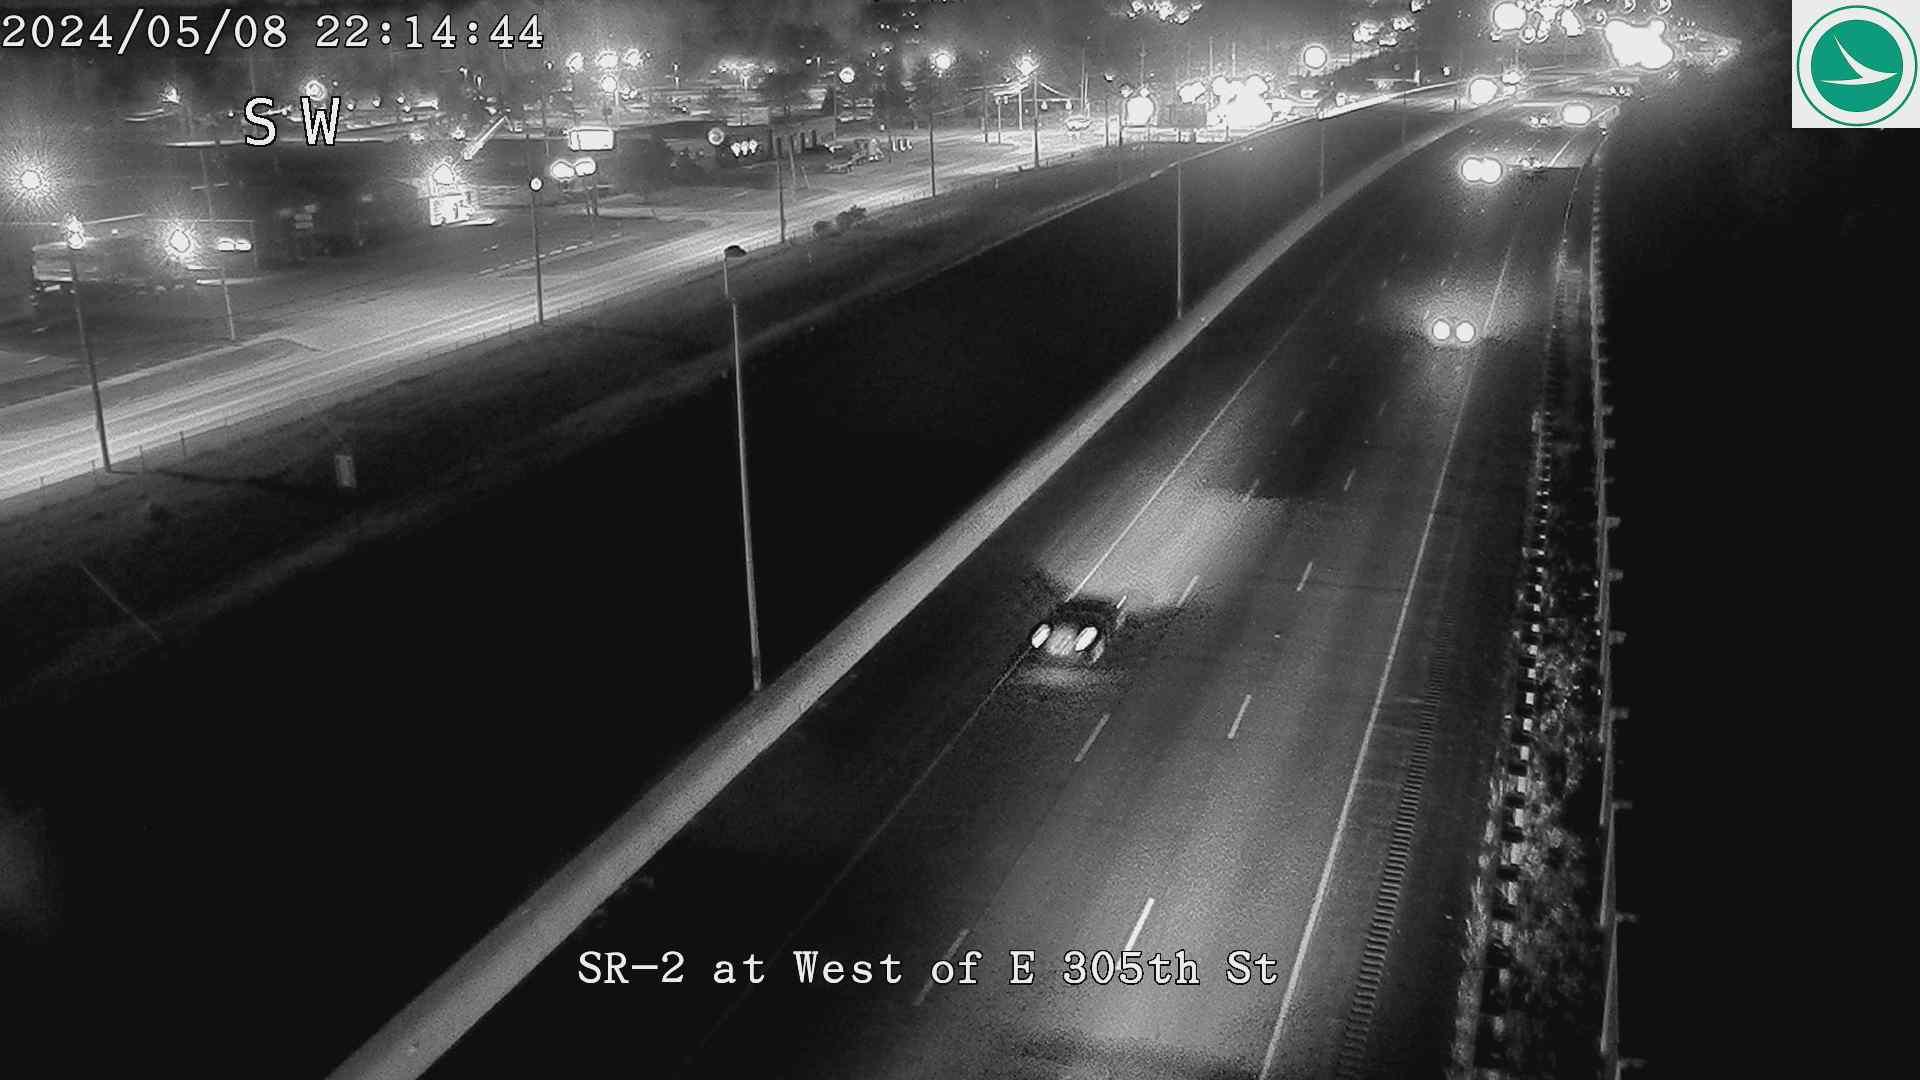 Wickliffe: SR-2 at West of E 305th St Traffic Camera